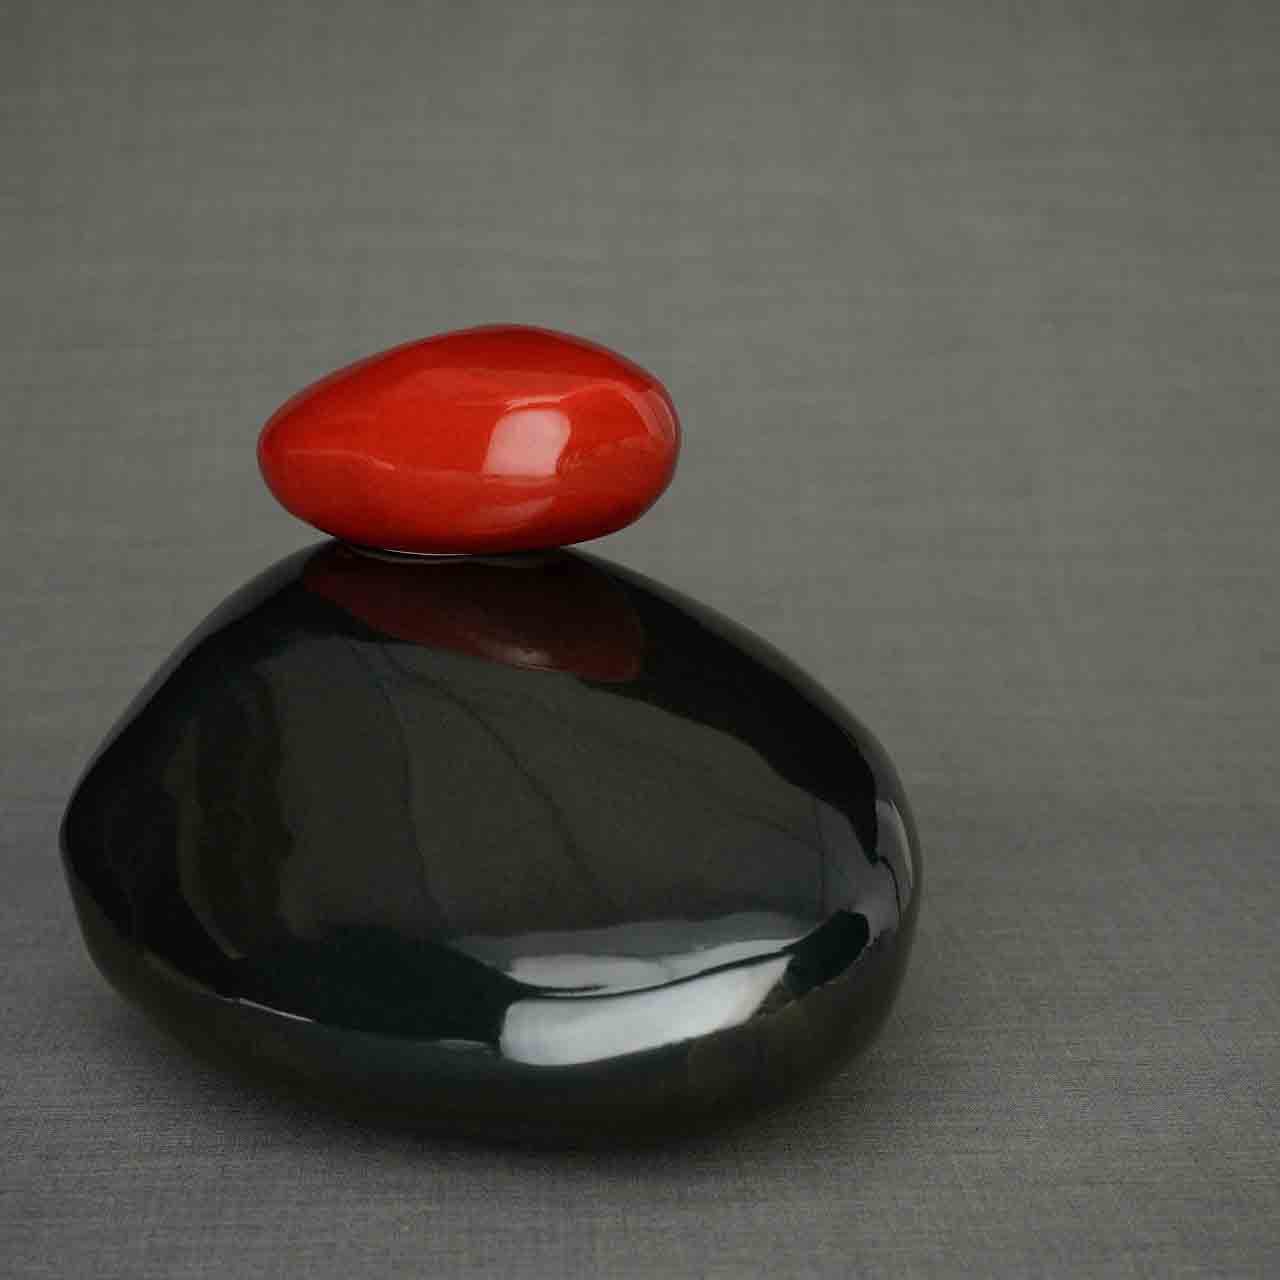 Pebbles Adult Cremation Urn for Ashes in Glossy Black and Red